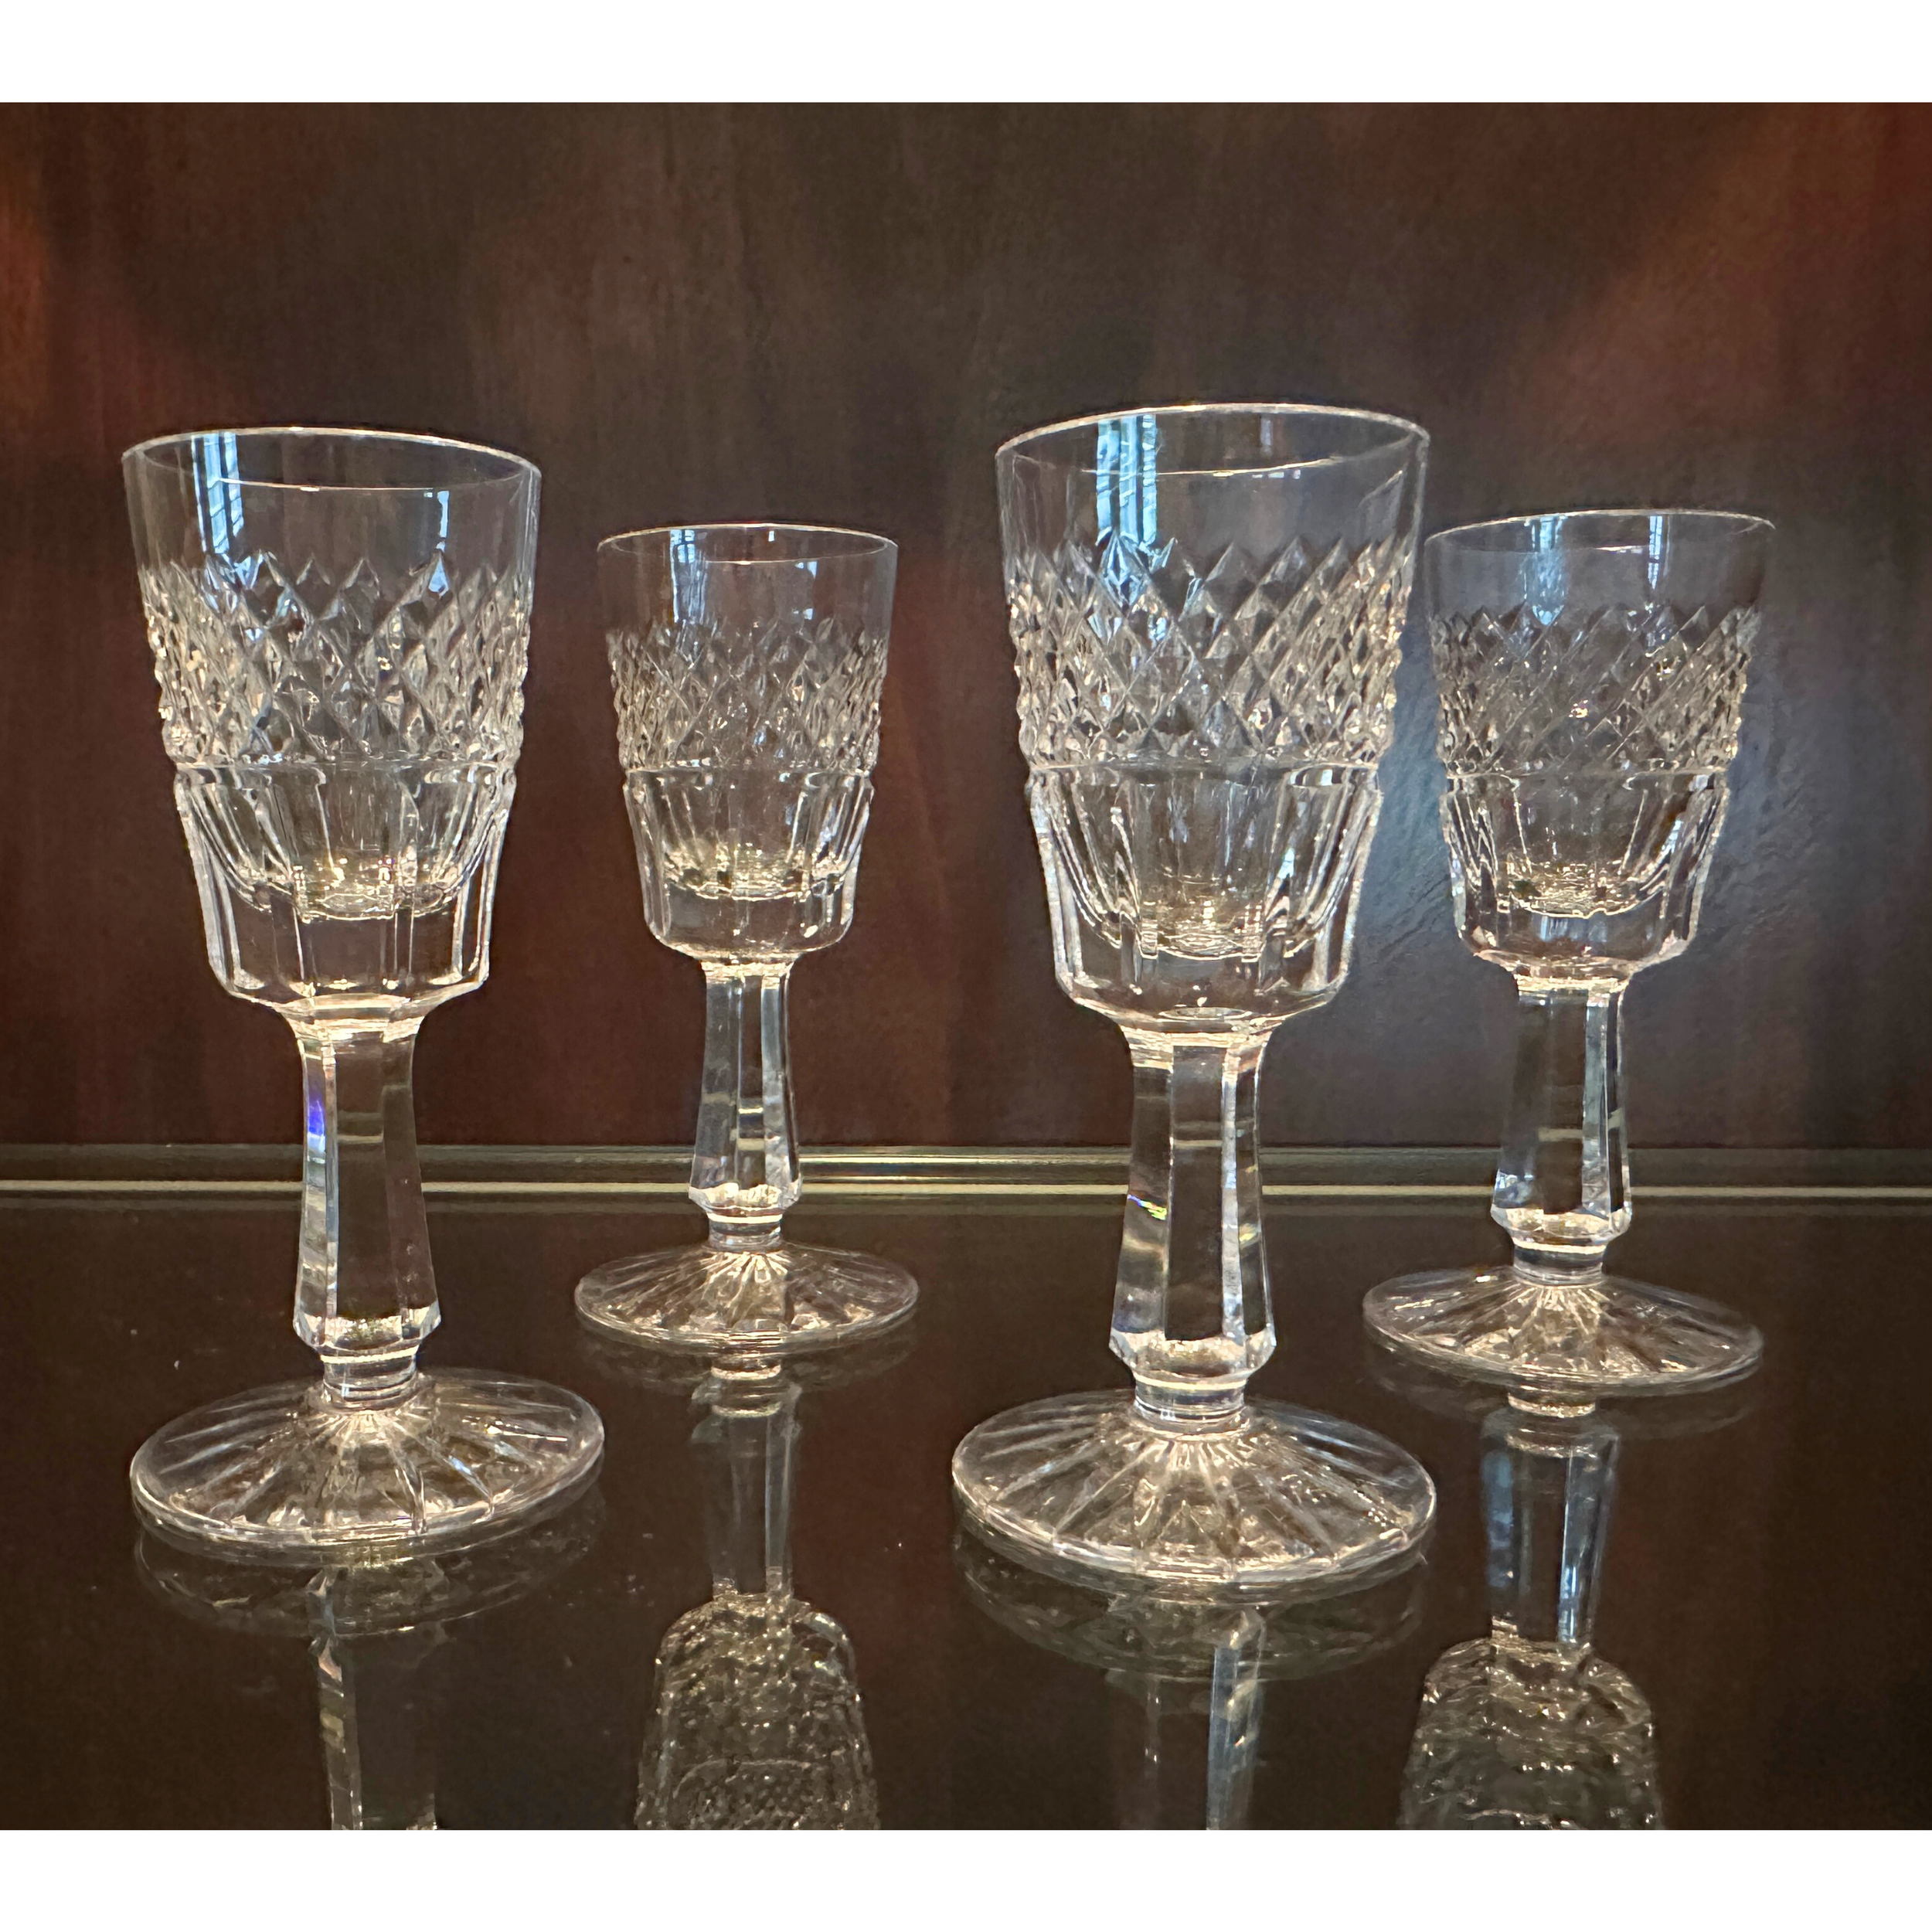 Waterford Cordial Glasses, set of 4